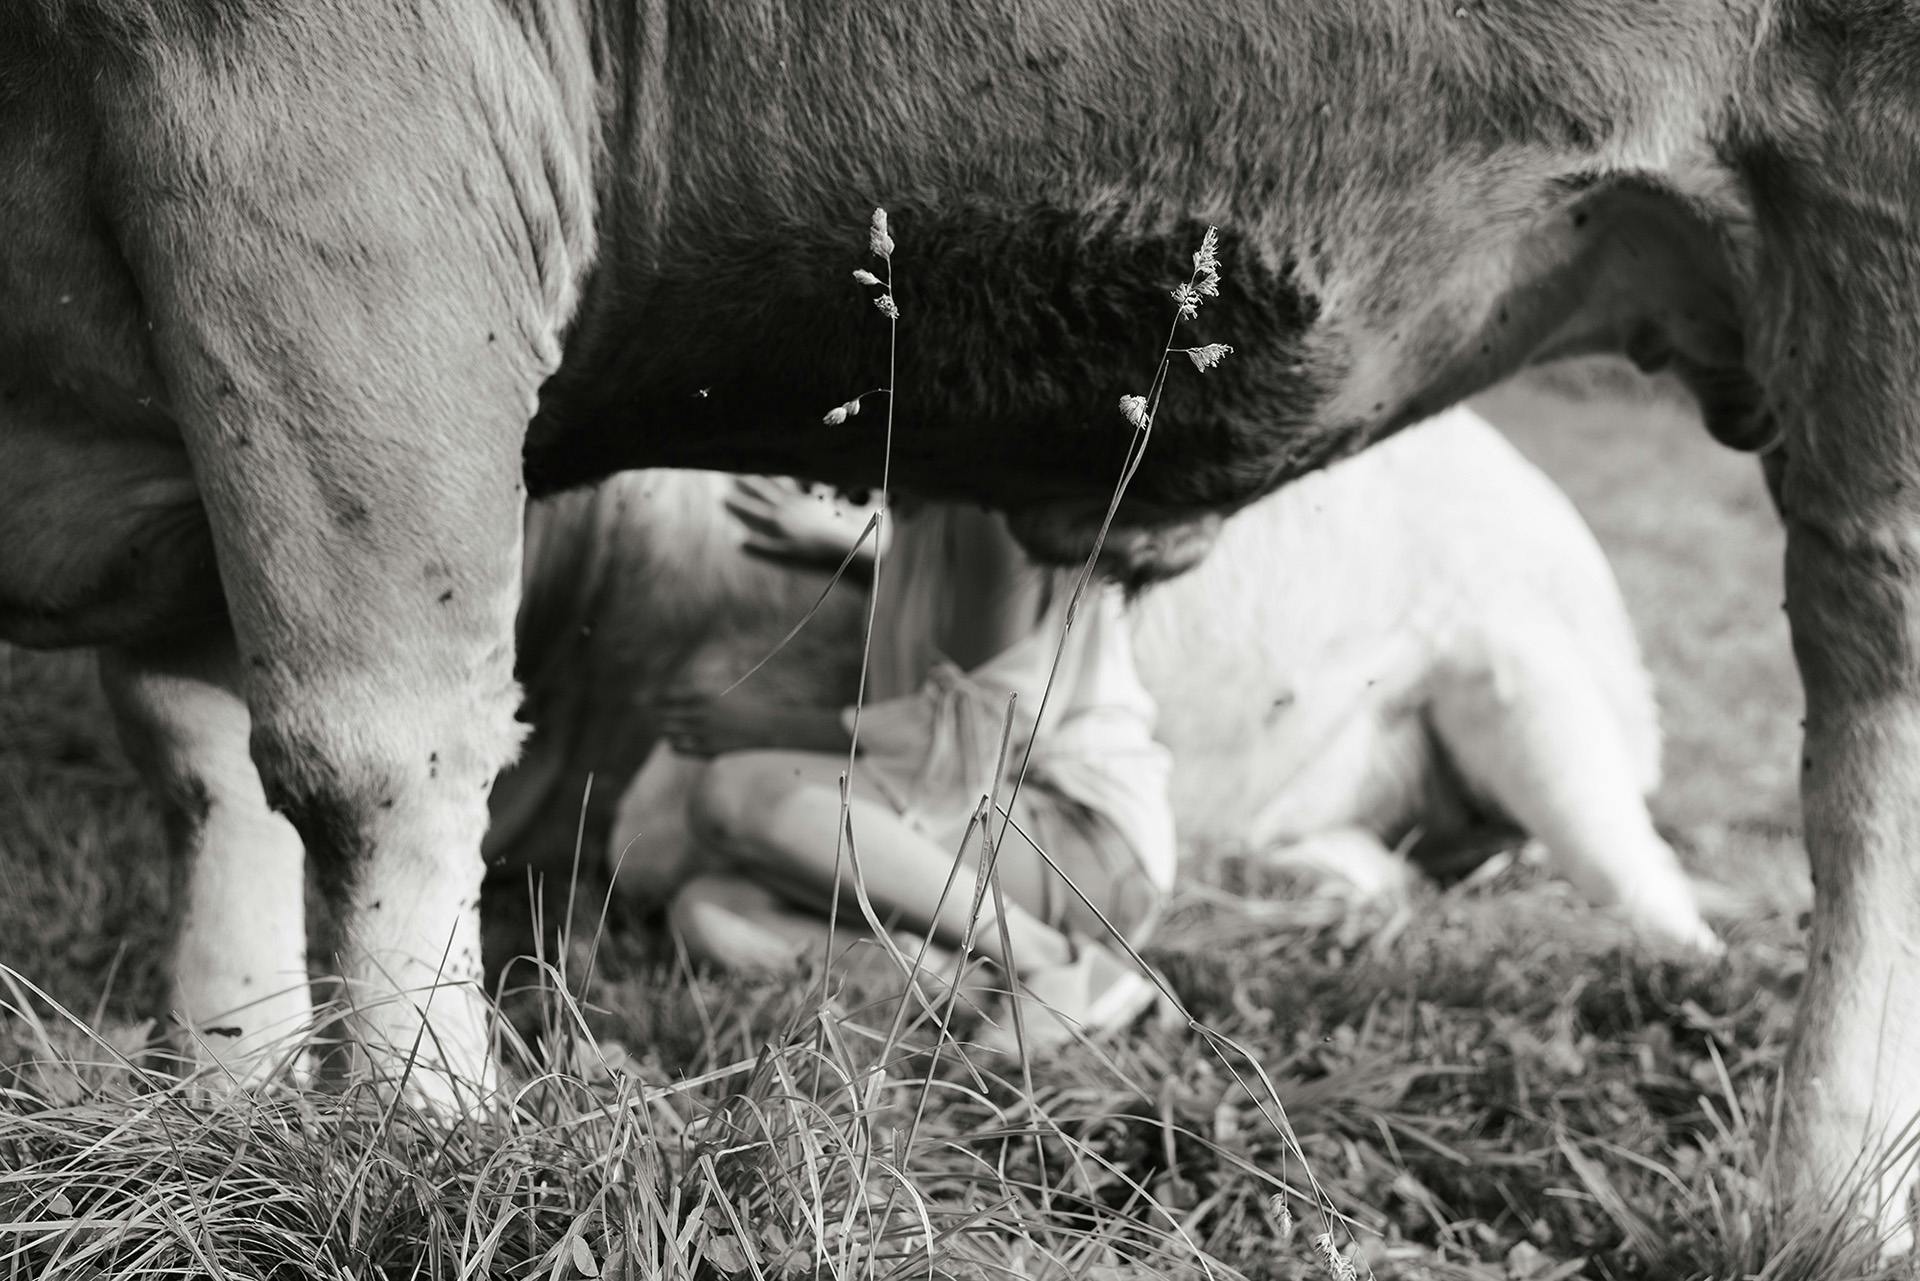 Black and white image of a young person stroking an animal, as seen through the underside of an animal